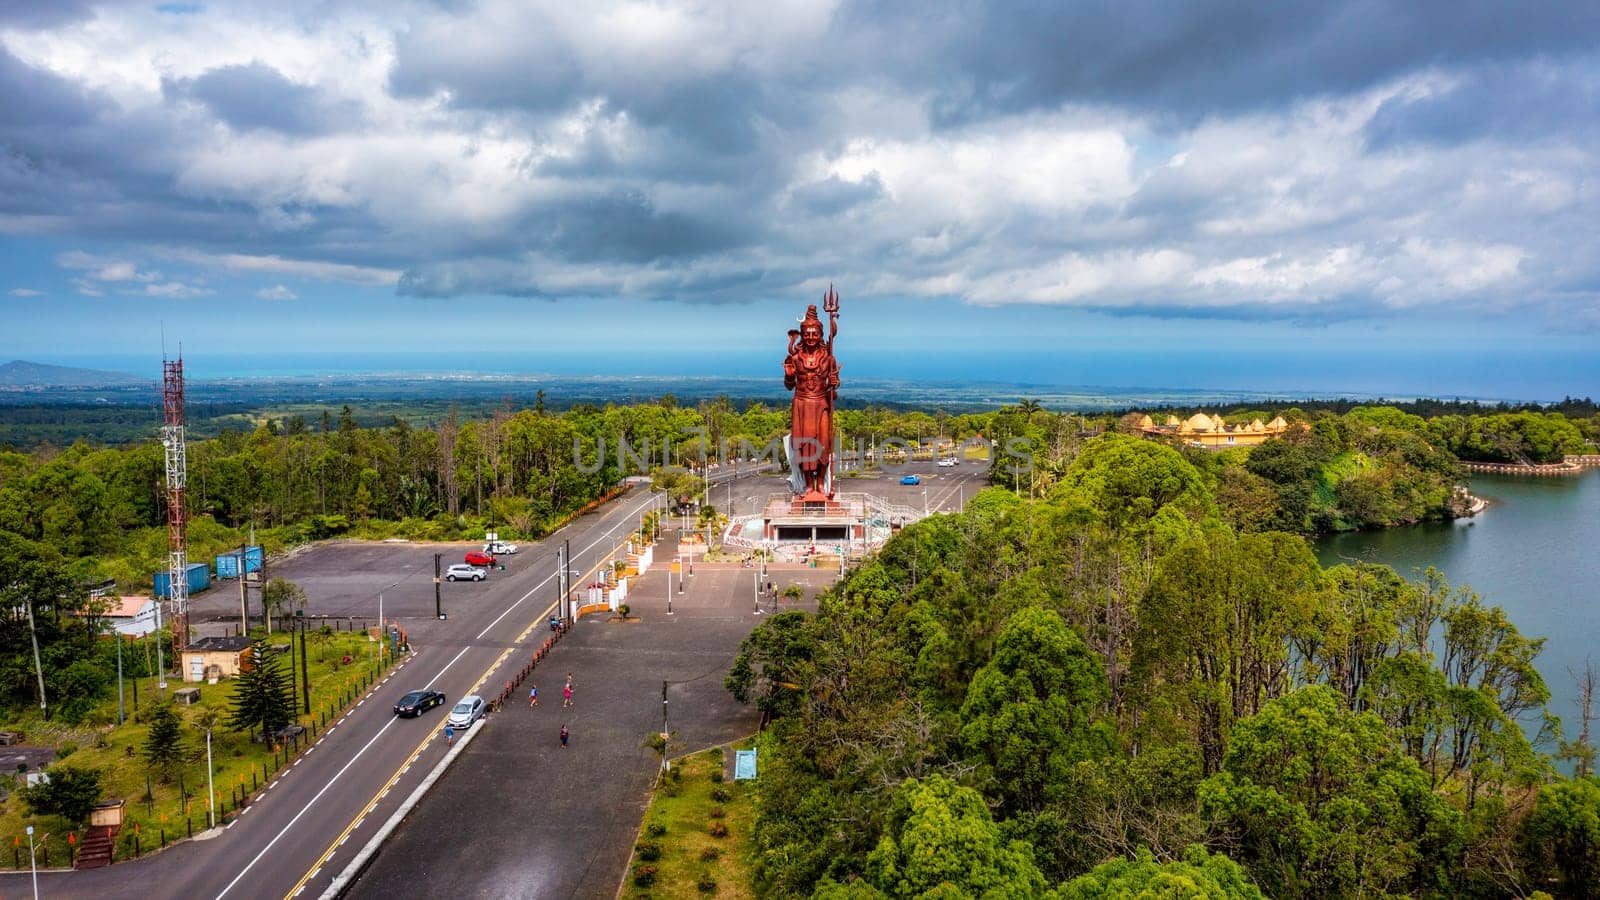 Shiva statue at Grand Bassin temple, the world's tallest Shiva temple, it is 33 meters tall. Important hindu temples of Mauritius. A large statue of the Hindu god Shiva, seen from above, Mauritius.